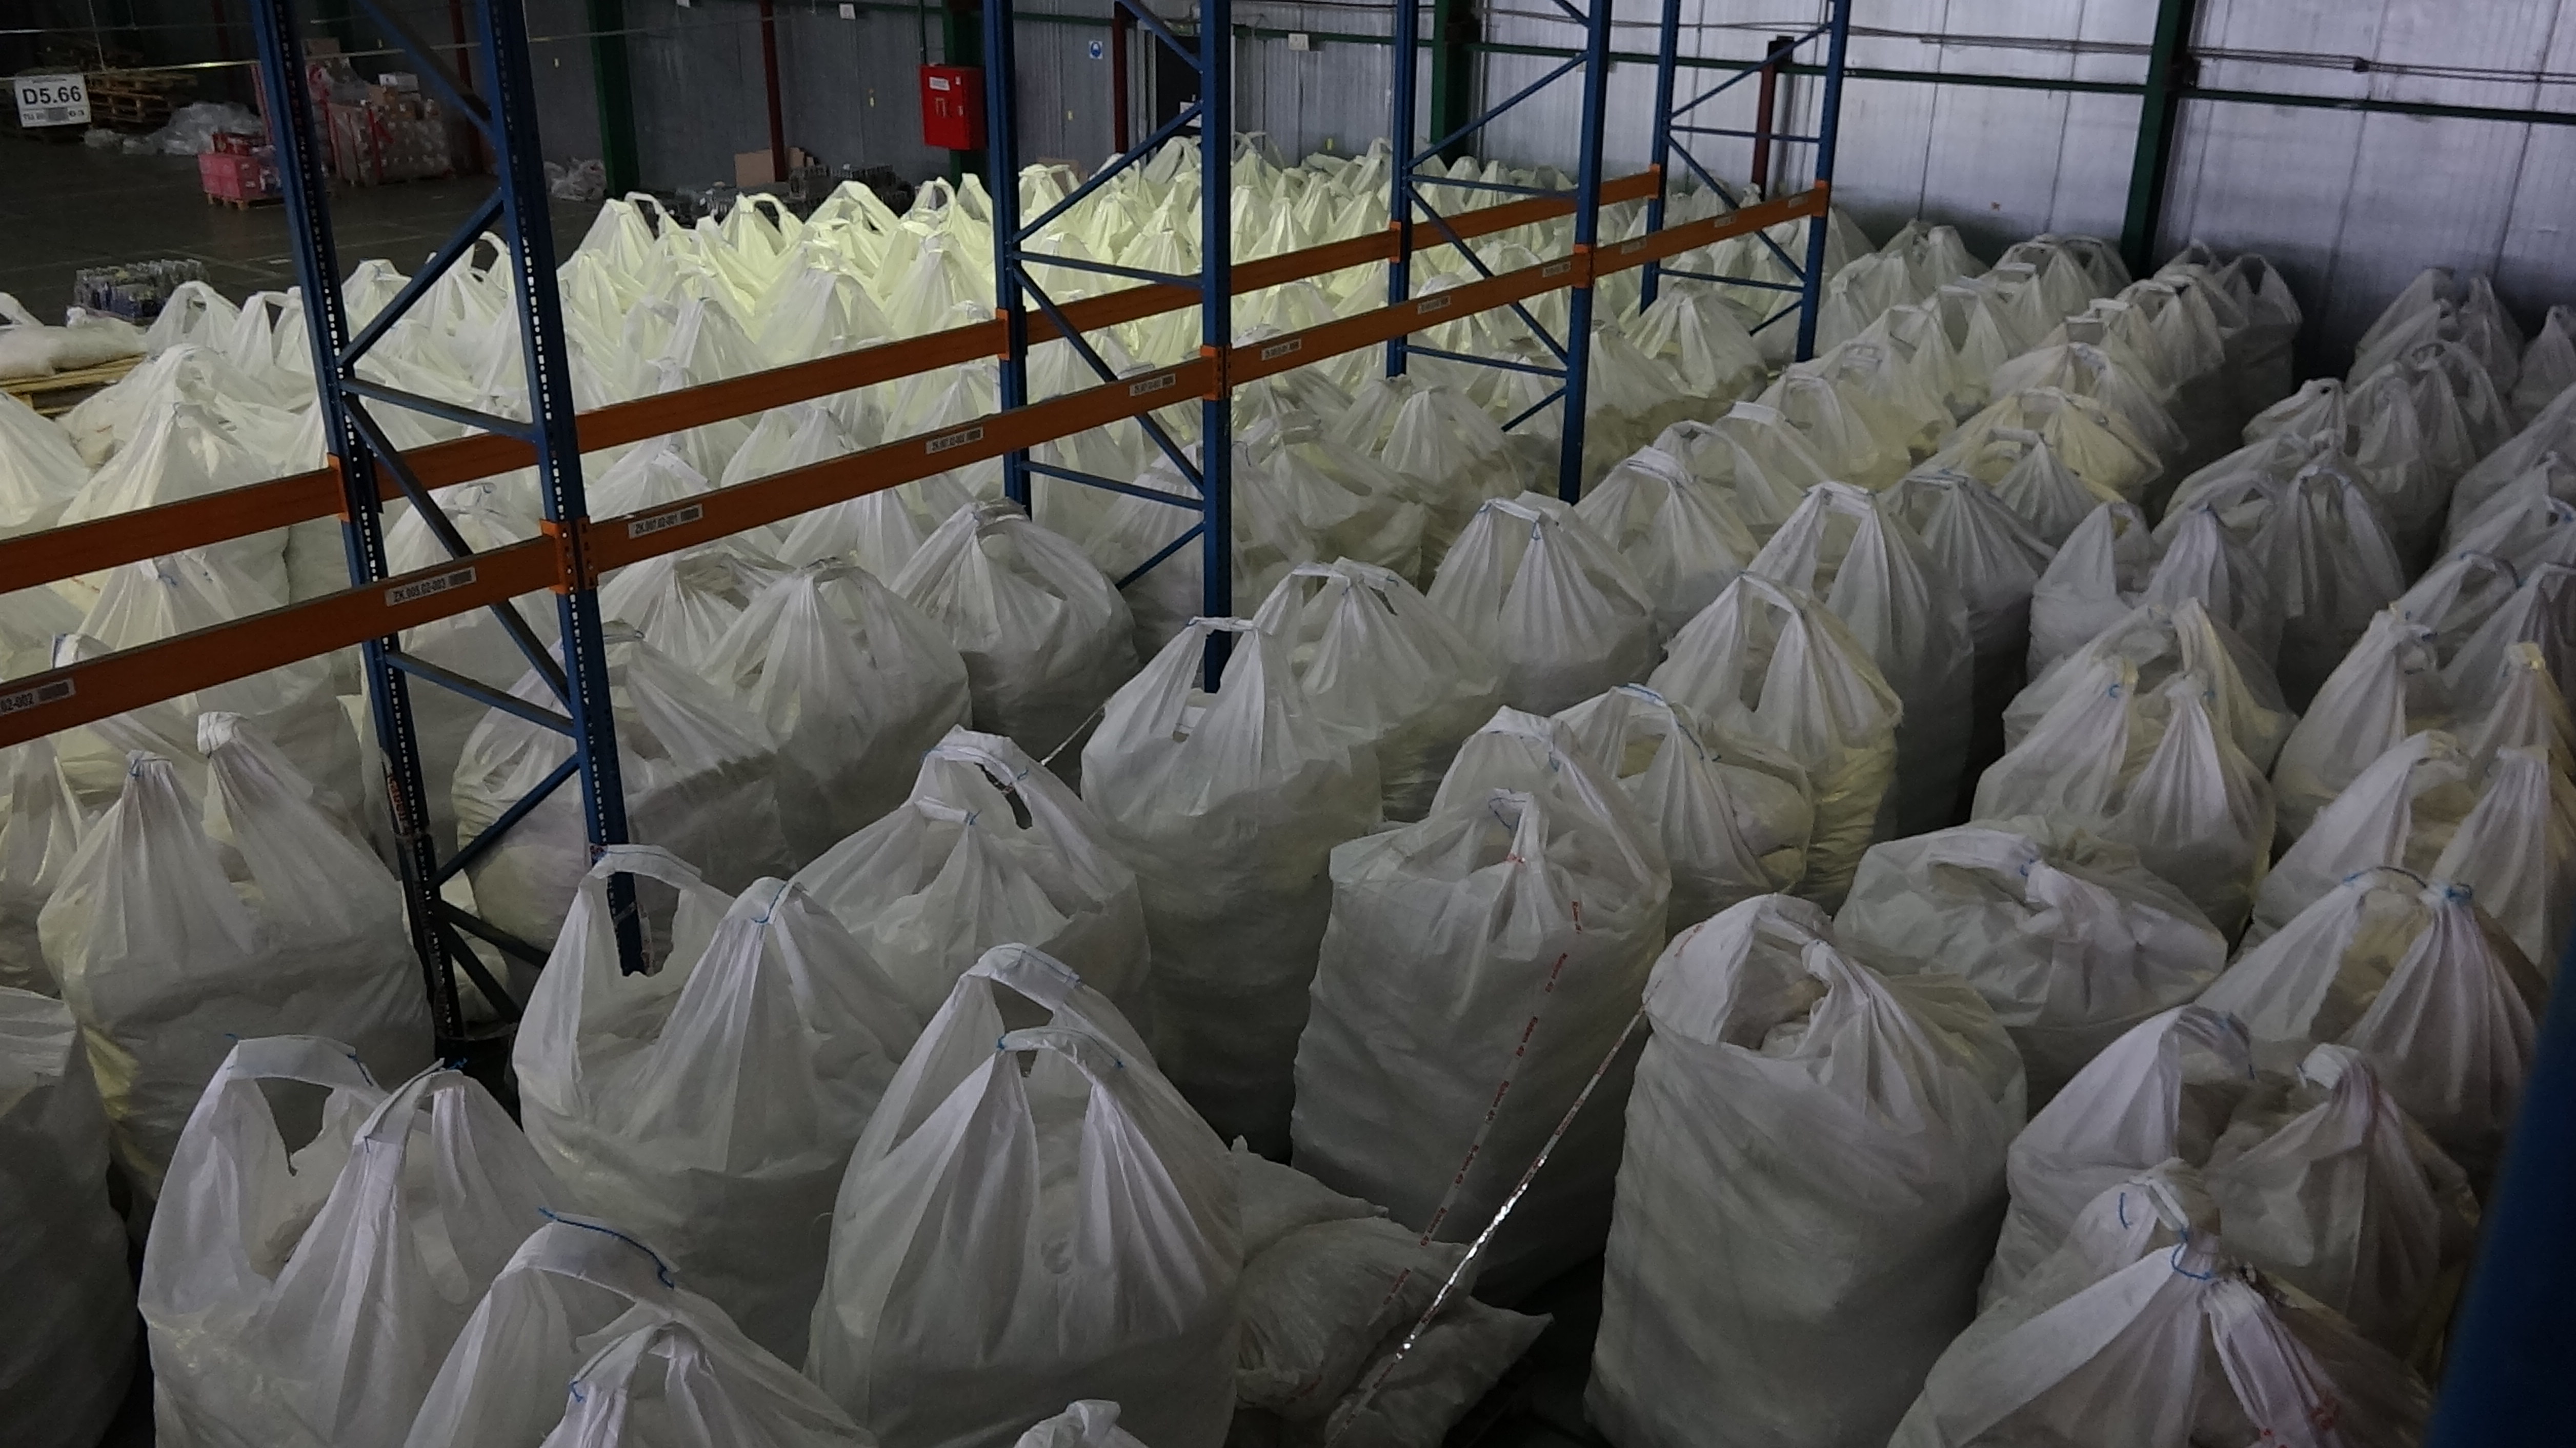 Bags filled with aluminium sulphate stored in a warehouse